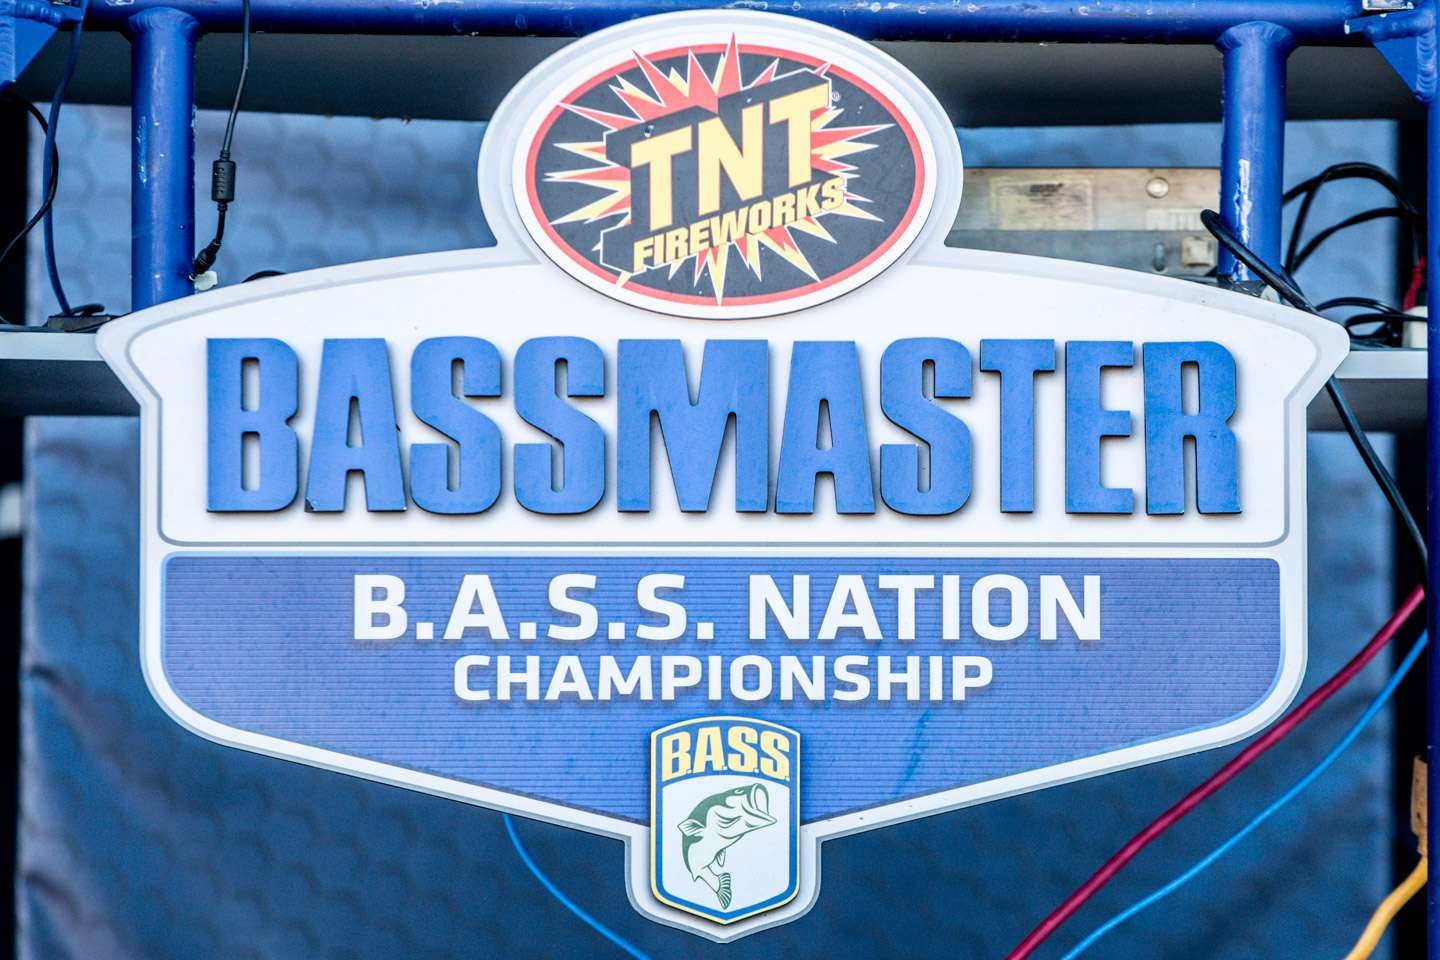 See the anglers weigh in after Day 2 of the TNT Fireworks B.A.S.S. Nation Championship in Louisiana.